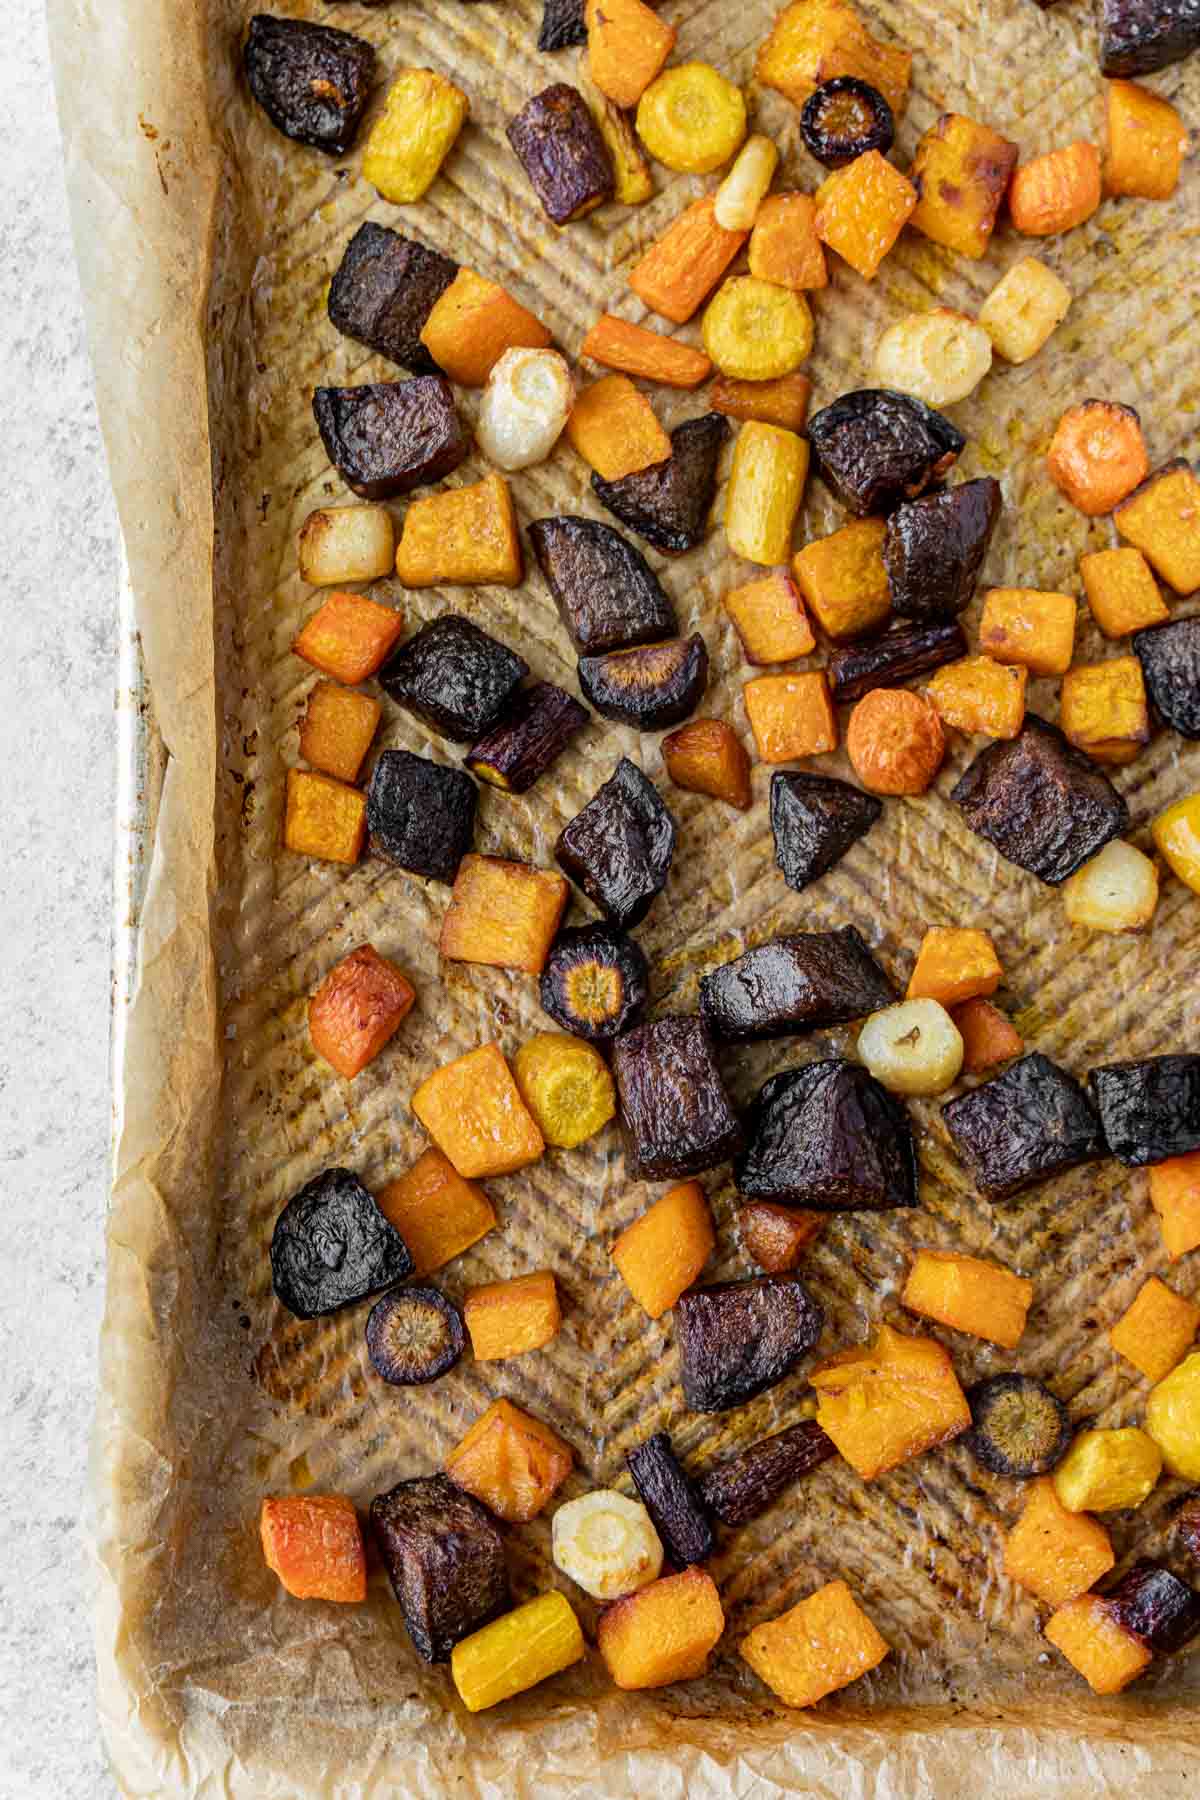 A sheet pan full of roasted root vegetables